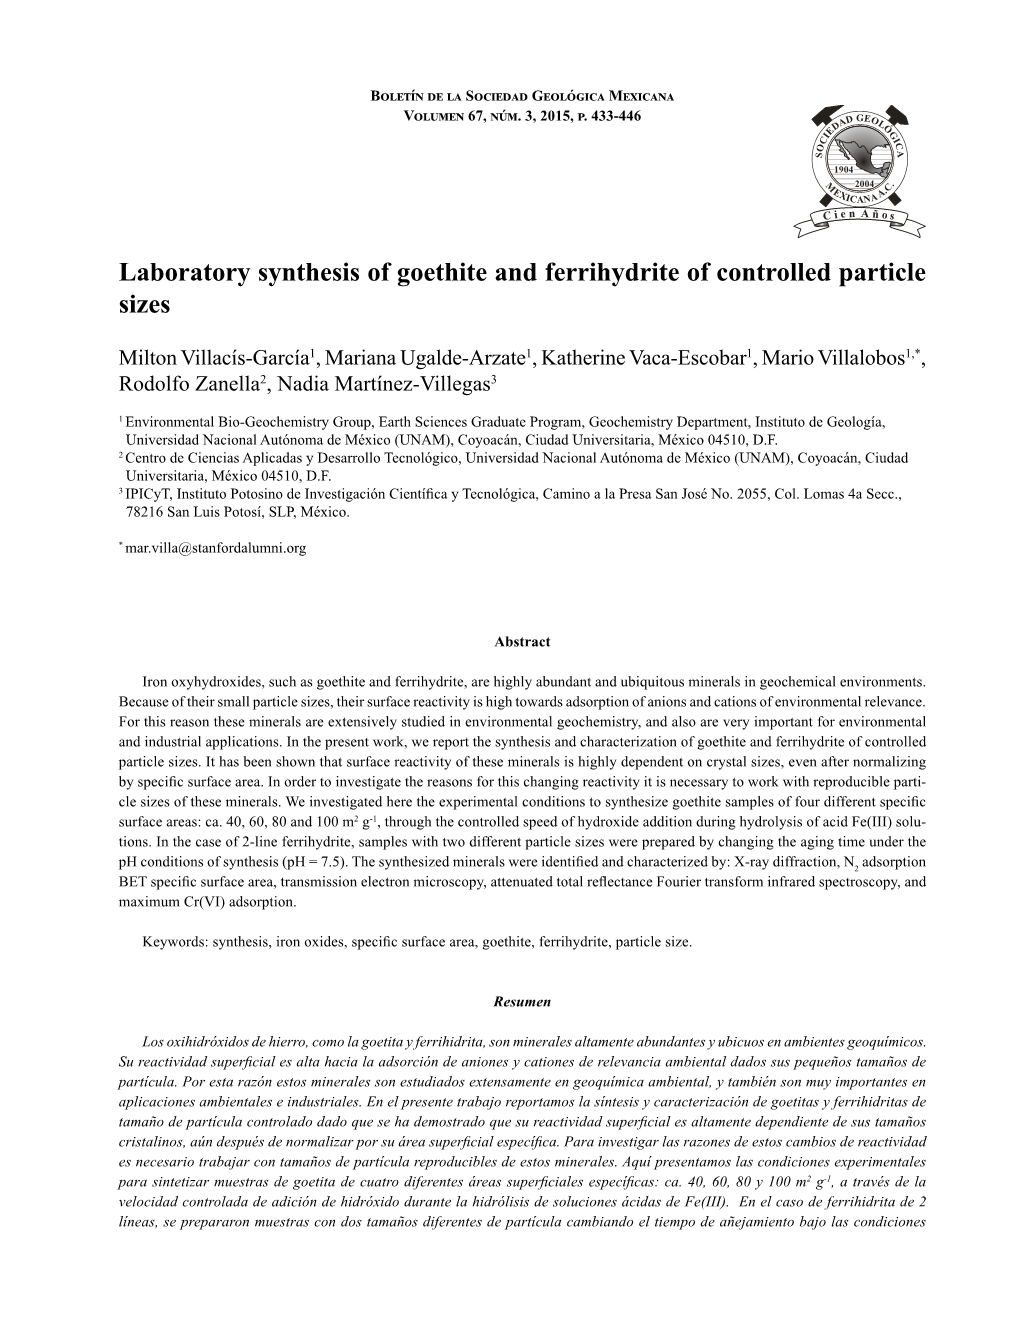 Laboratory Synthesis of Goethite and Ferrihydrite of Controlled Particle Sizes 433 Boletín De La Sociedad Geológica Mexicana